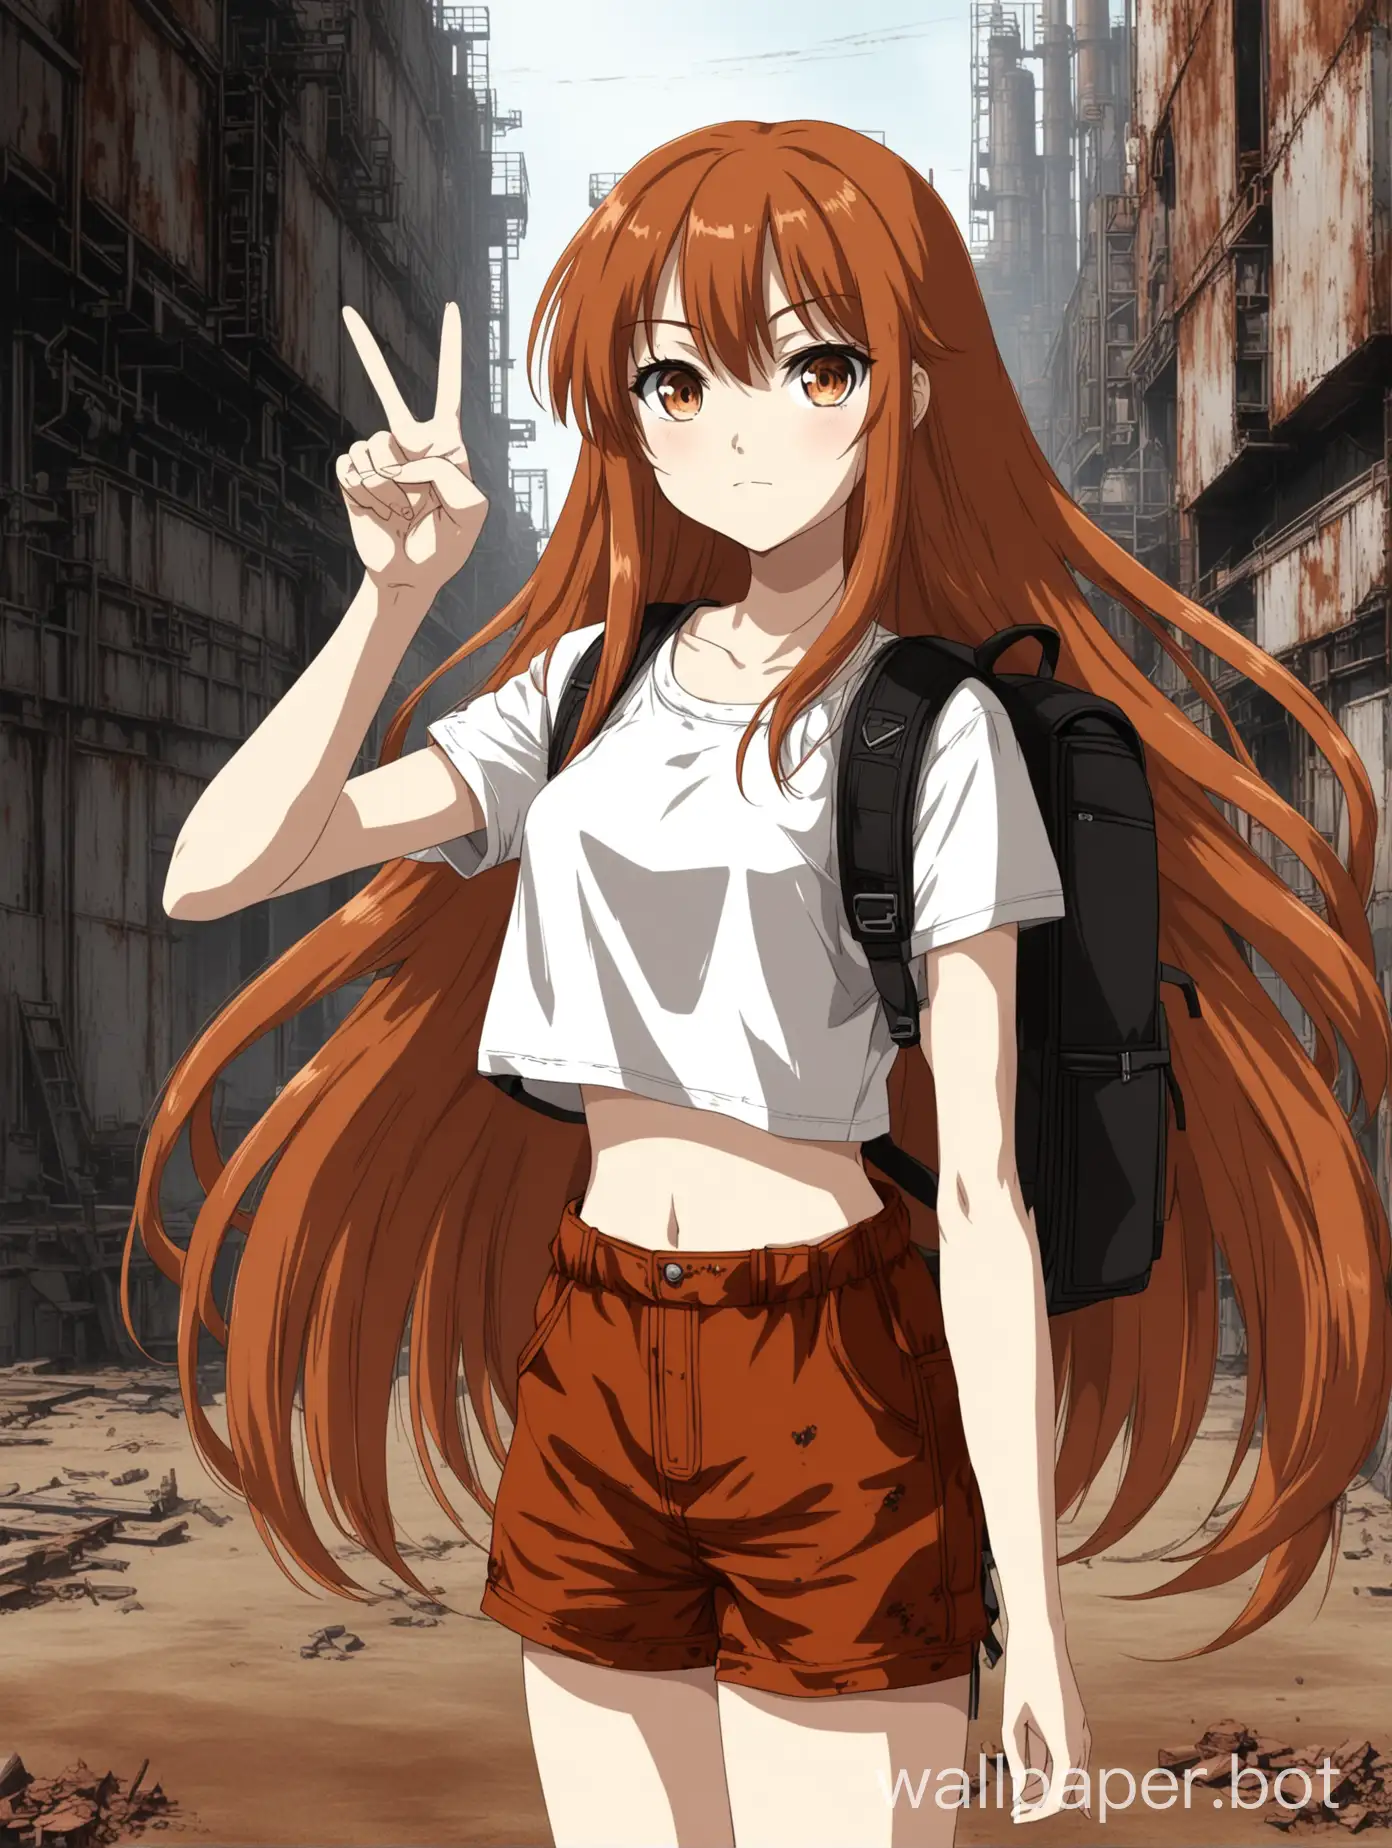 Anime-Girl-with-RustColored-Hair-and-Backpack-Strikes-V-Sign